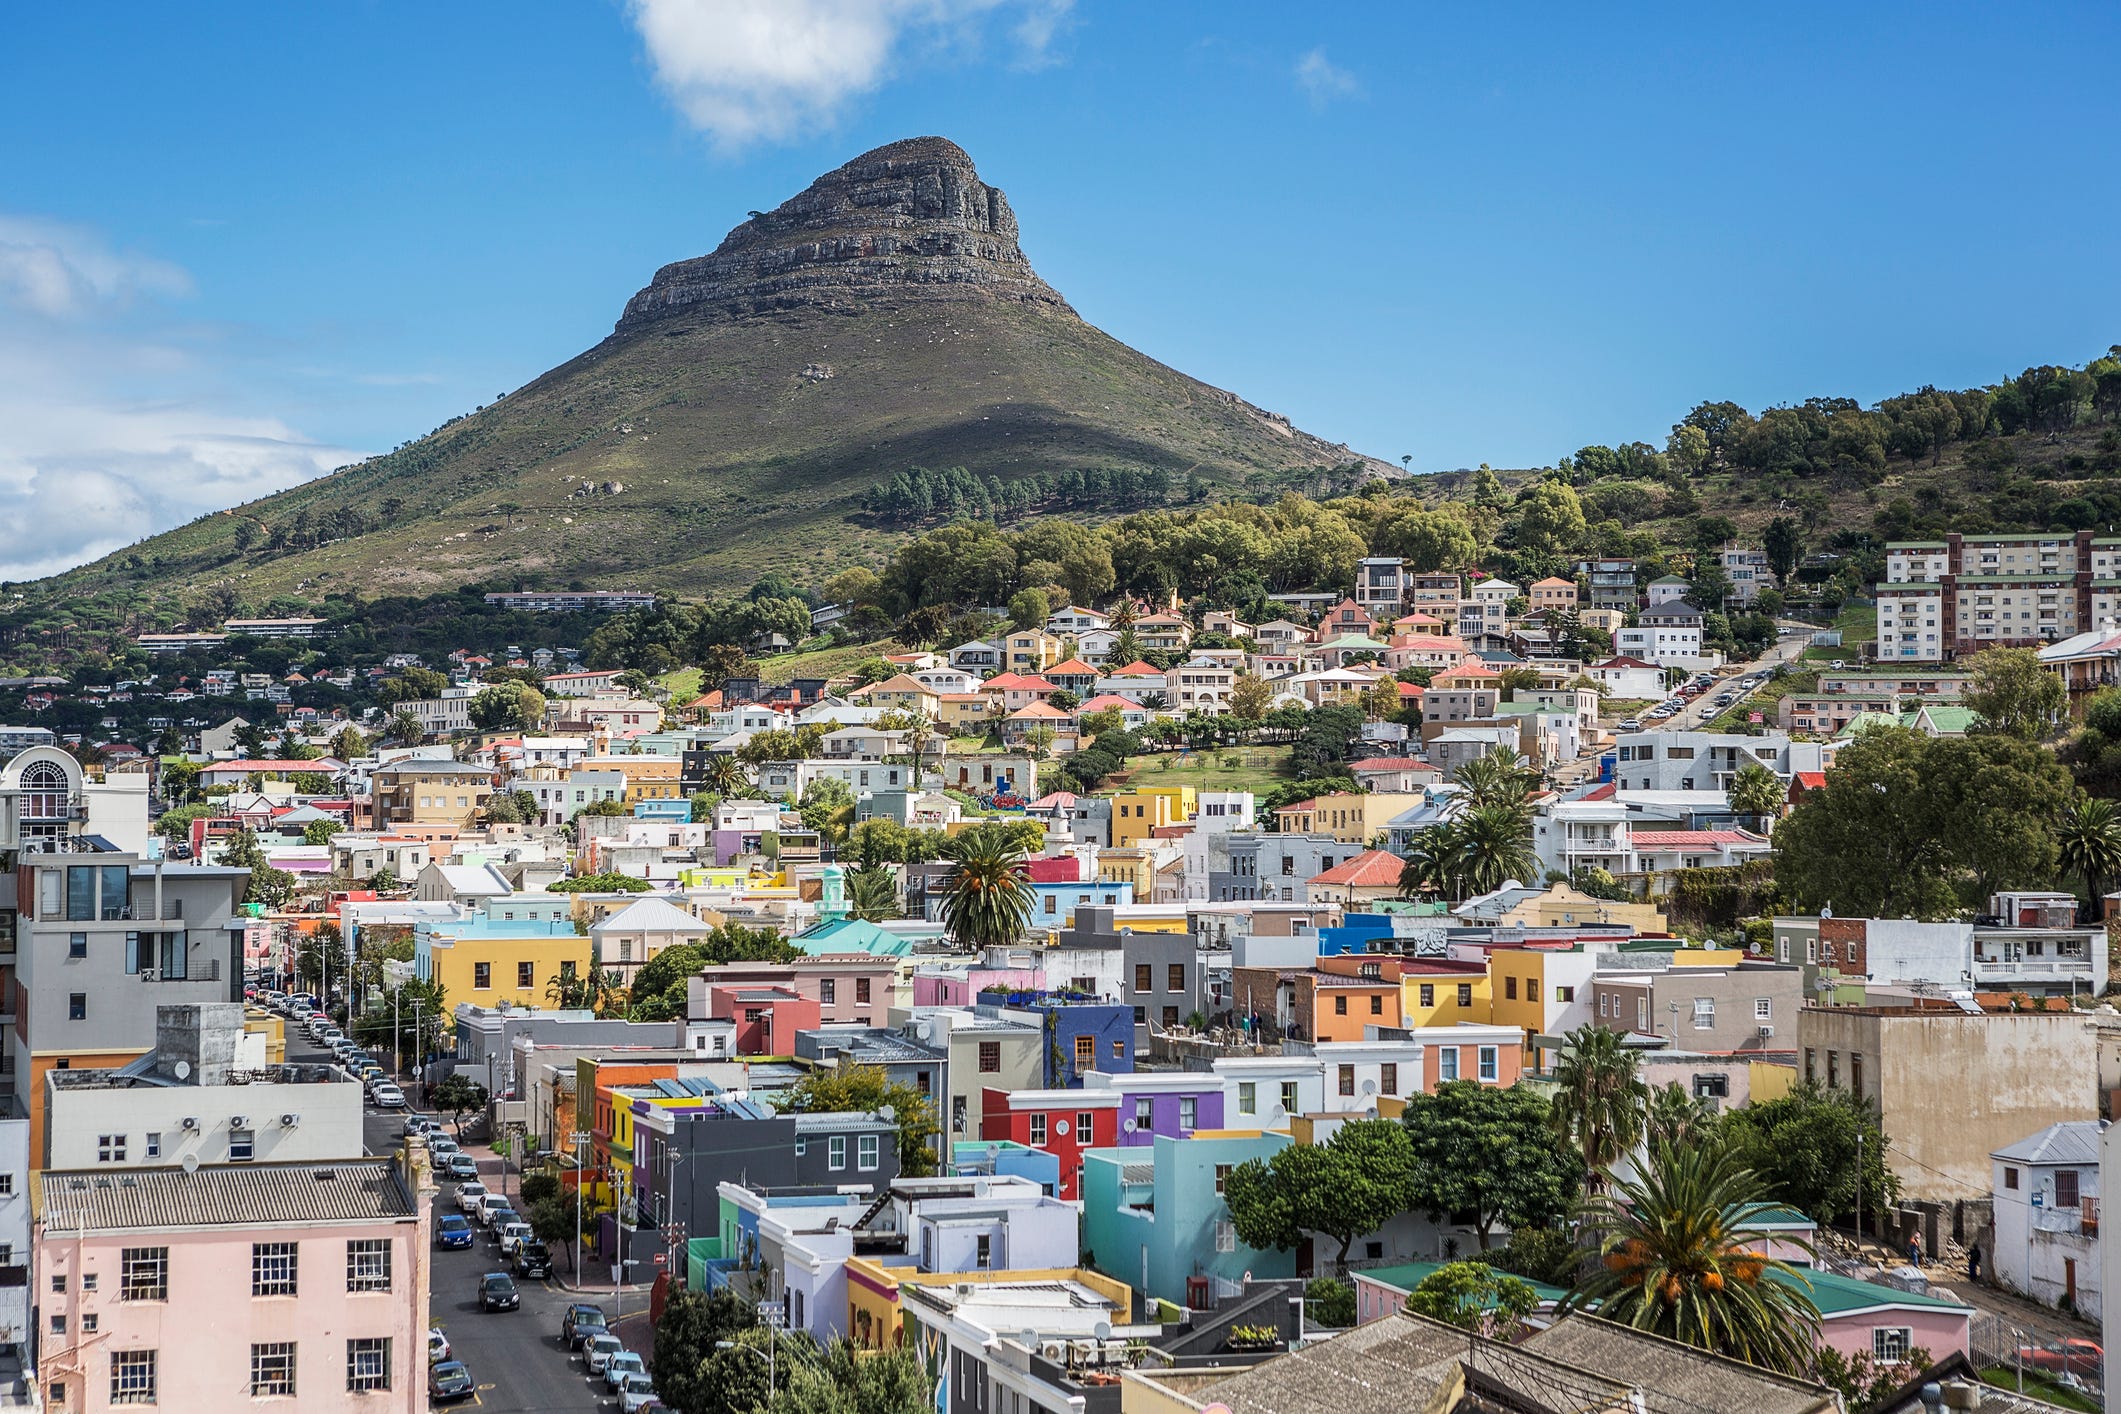 <p><span>Anyone </span><a href="https://www.businessinsider.com/cape-town-south-africa-things-to-love-food-hikes-art-2022-2"><span>visiting Cape Town</span></a><span> would be impressed by its natural beauty. Its landscape features forests, beaches, mountains, and the majestic Table Mountain that looms over the city and bay.</span></p><p><span>You can reach the top of Table Mountain by hiking or taking the far less strenuous cable car. Despite being fit, I chose the latter option, which allowed me to spend more time at the top. </span></p><p><span>The views overlooking the ocean are an Instagrammer's dream. For those who prefer to get a bird' s-eye view of Table Mountain, climbing the nearby Lions Head Mountain is also possible, though there is no cable-car option.</span></p>